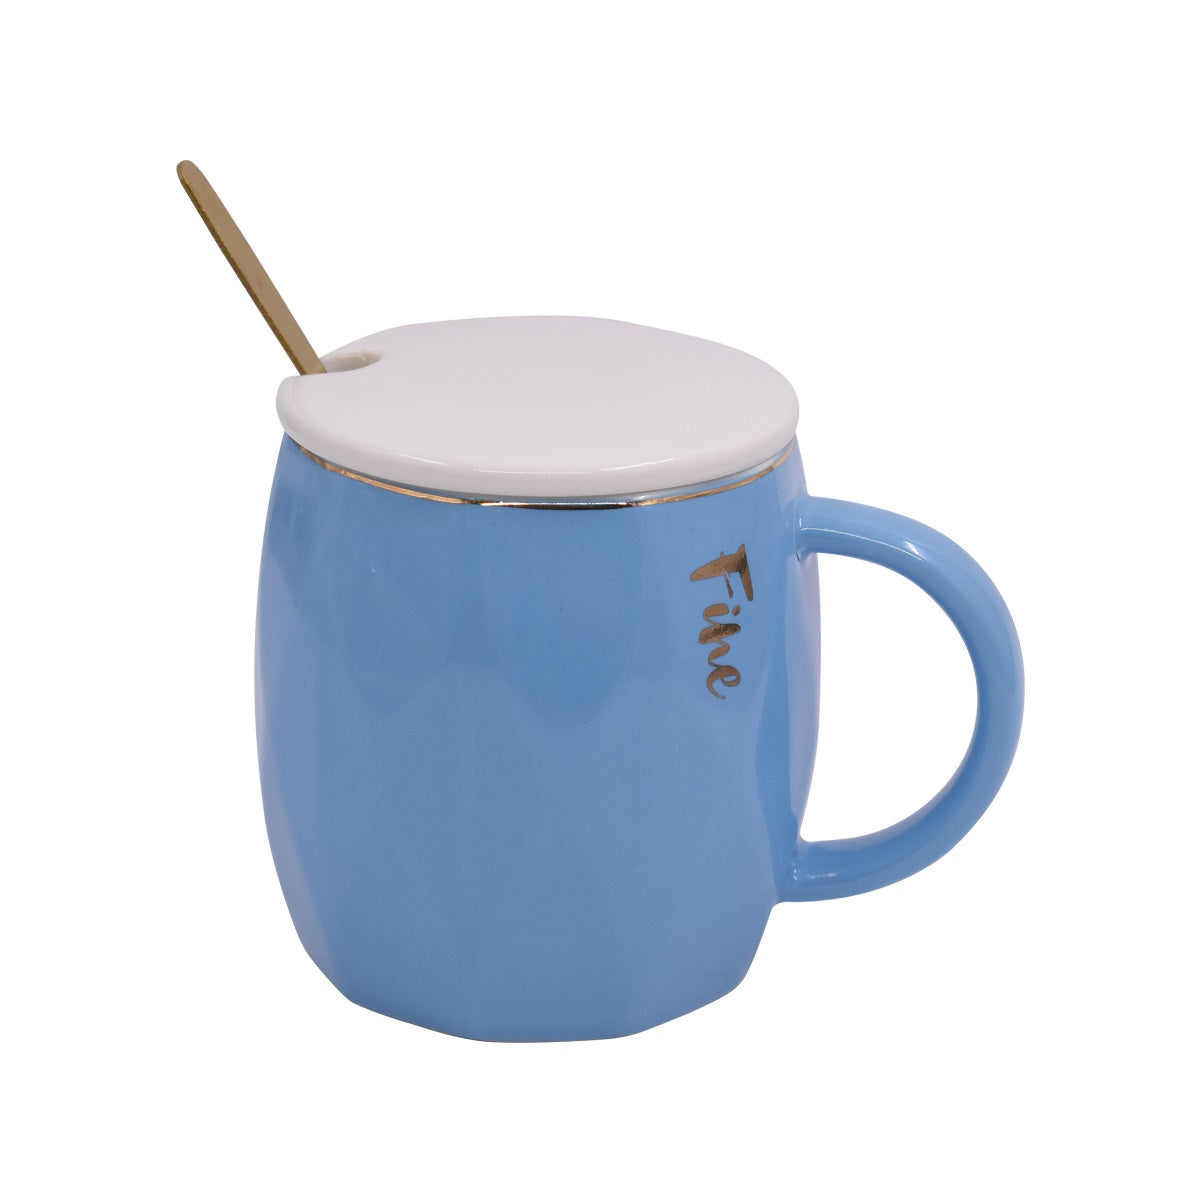 Fancy Ceramic Coffee or Tea Mug with Lid and Handle with Spoon (8437)